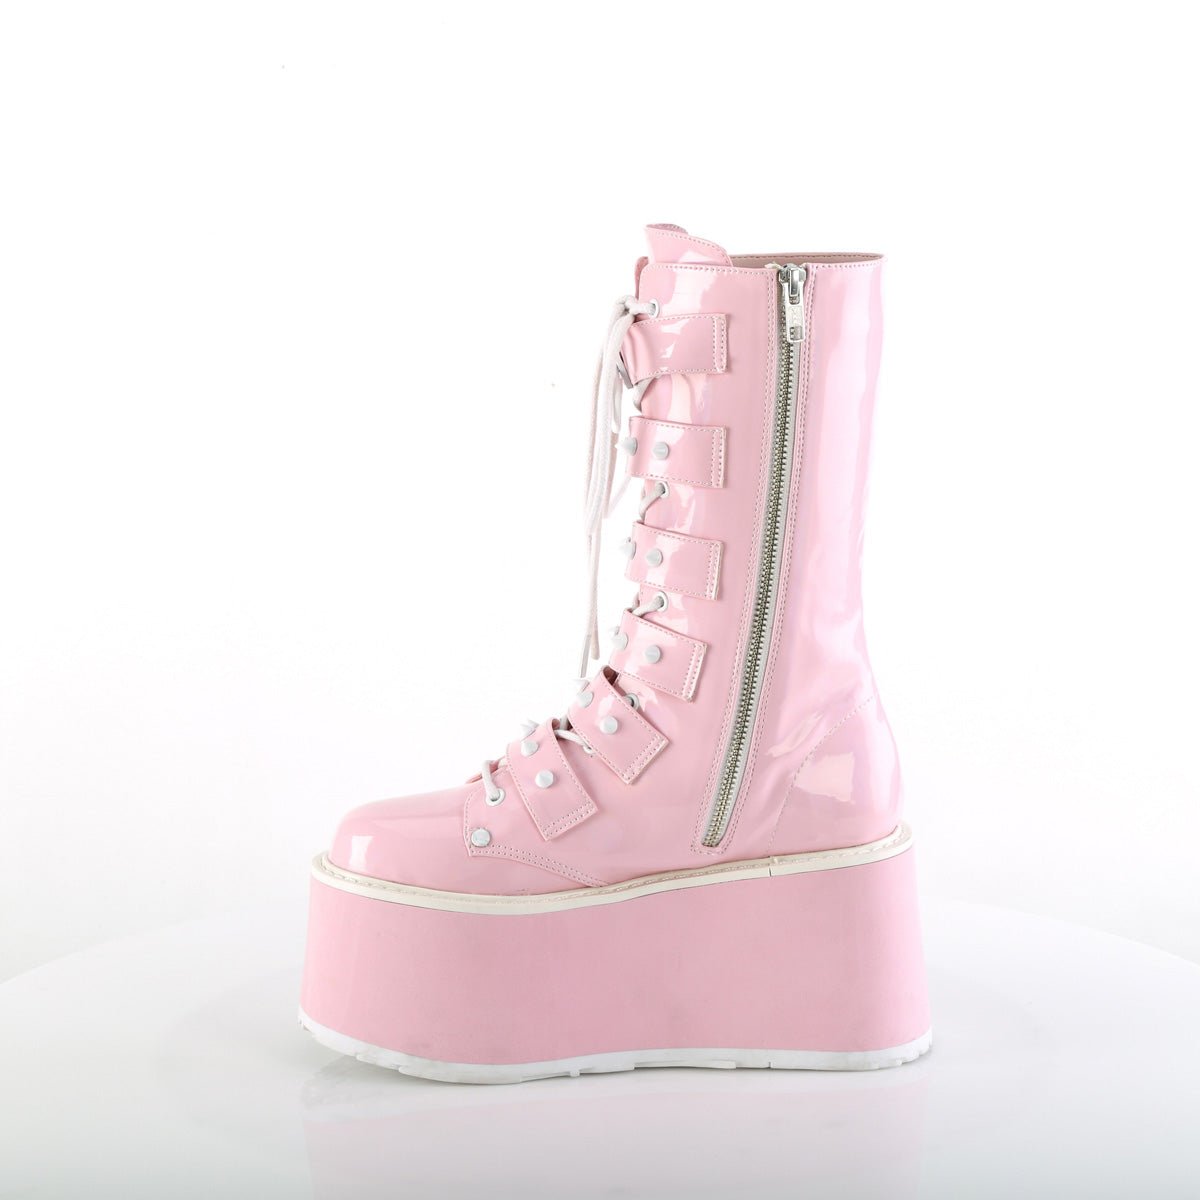 Too Fast | Demonia Damned 225 | Baby Pink Hologram Patent Women's Mid Calf Boots